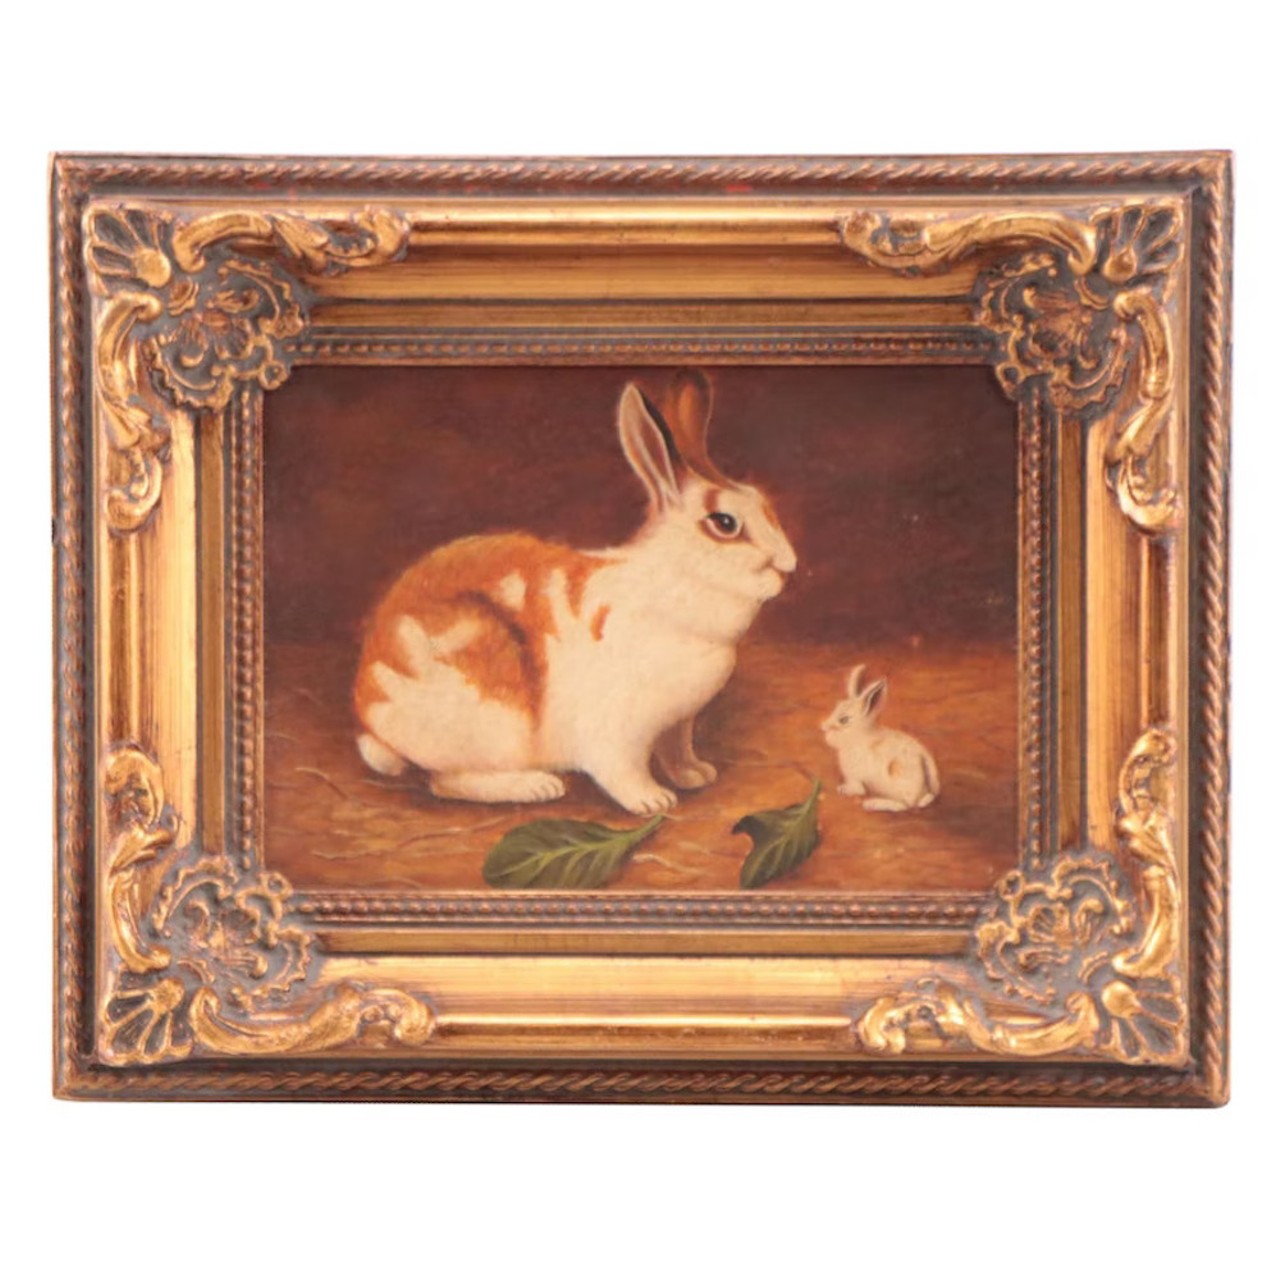 Oil Painting of Mother Bunny and Baby
Gilded frames have made a huge comeback, but cute animals never go out of style. This framed oil painting of a mother bunny and her baby would make a quirky addition to a friend’s gallery wall. If you’re not sure what to get your friends with a new baby, this would be a stylish nursery addition.